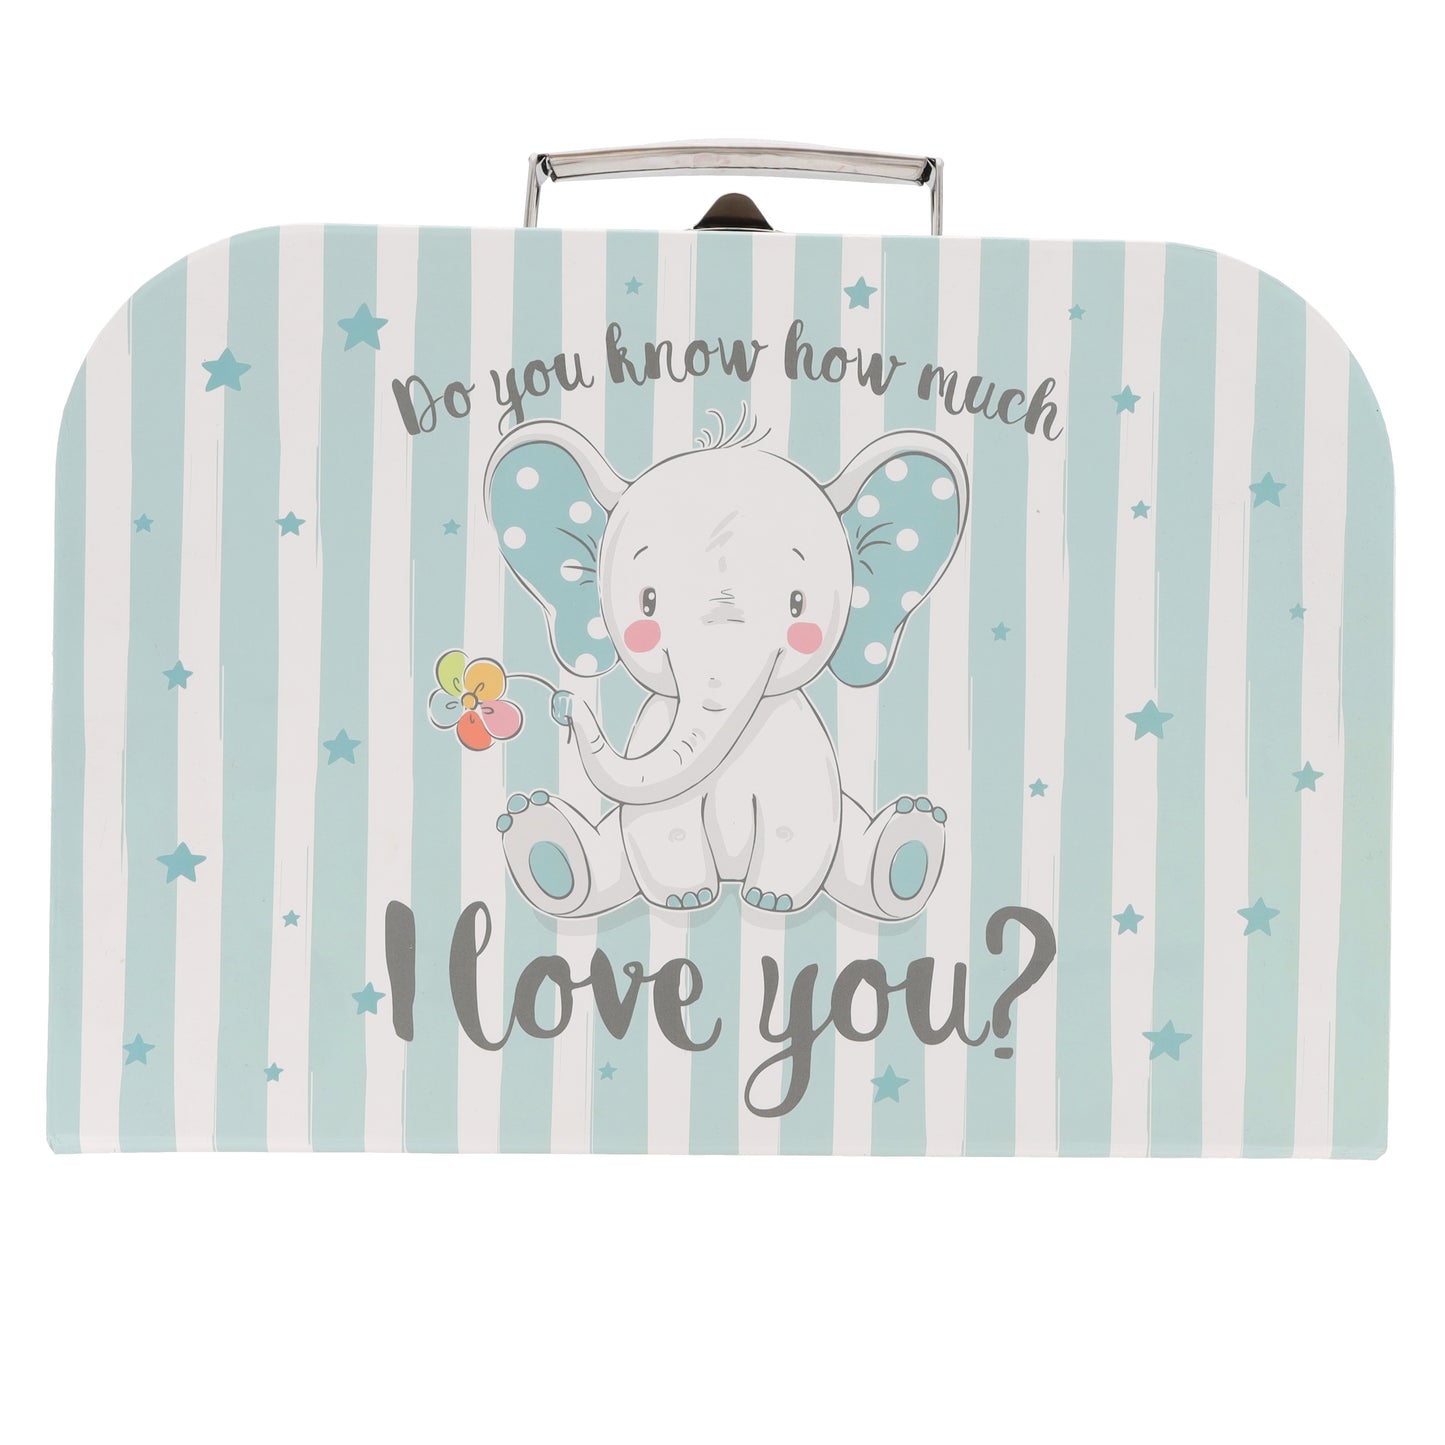 Personalised Storage Suitcase Filled Kids Gift Set  - Always Looking Good - Small Blue Elephant  